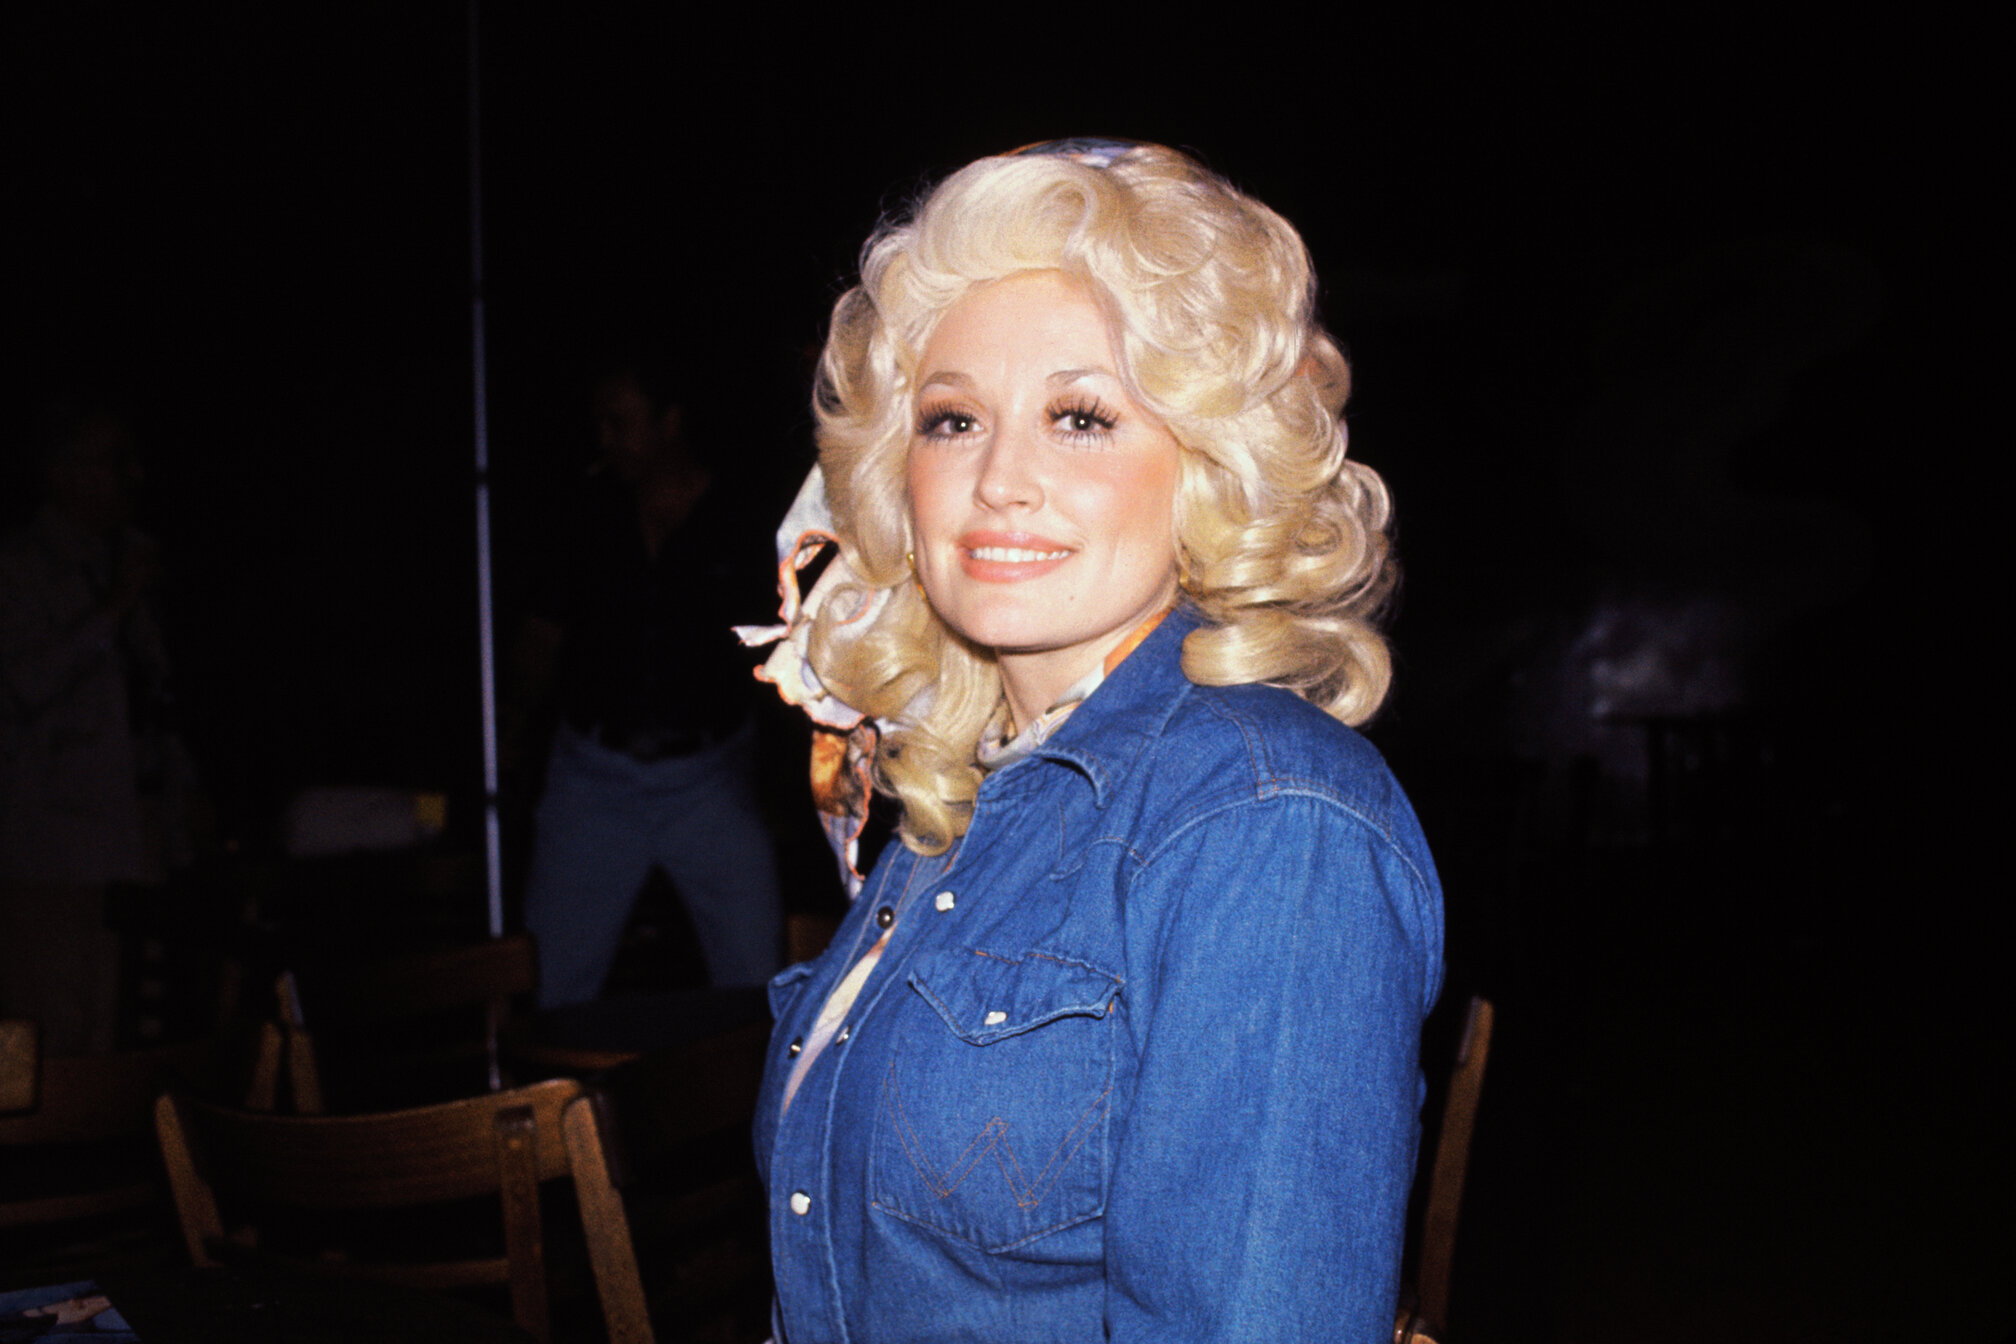 Portrait of singer and actress Dolly Parton in 1979.